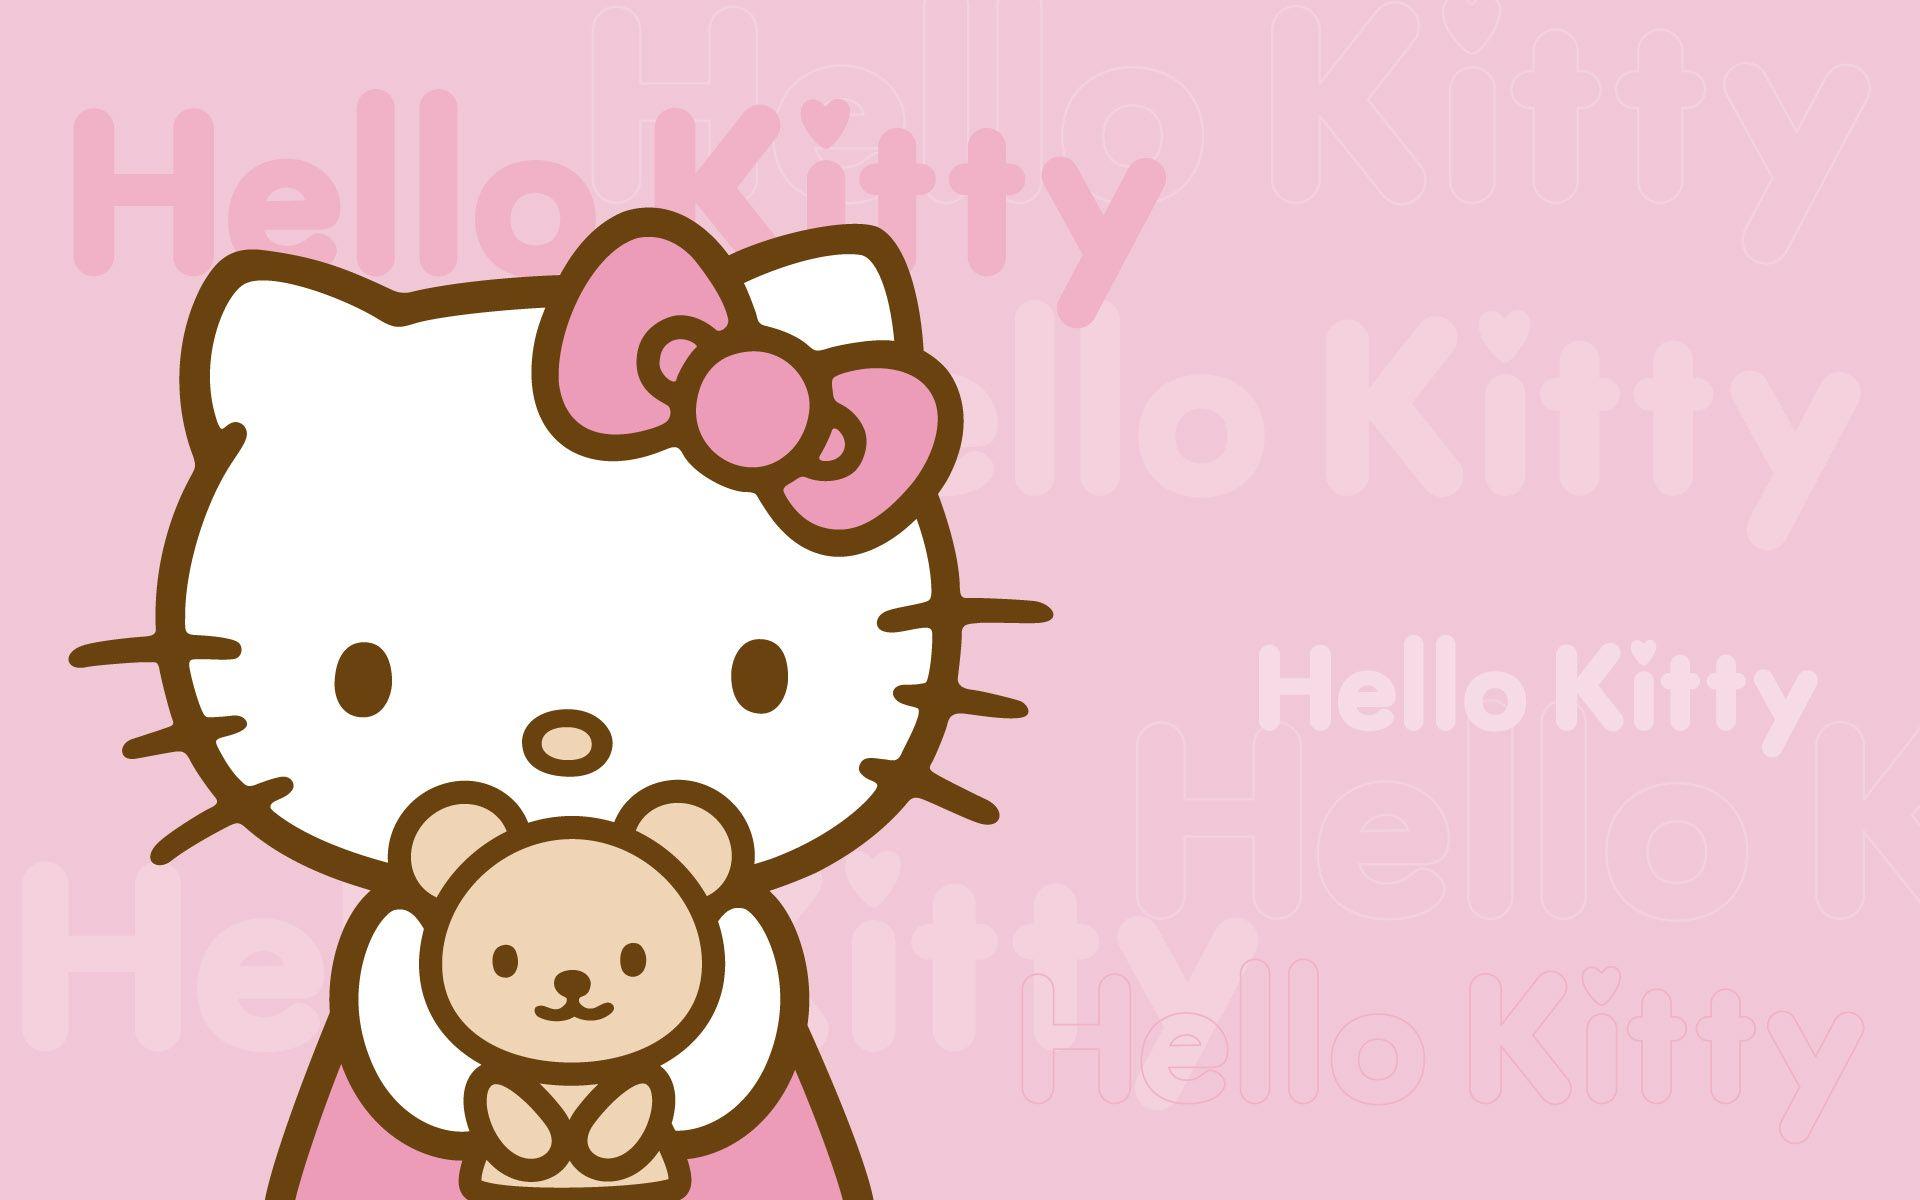 Hello kitty wallpaper with hearts and umbrellas